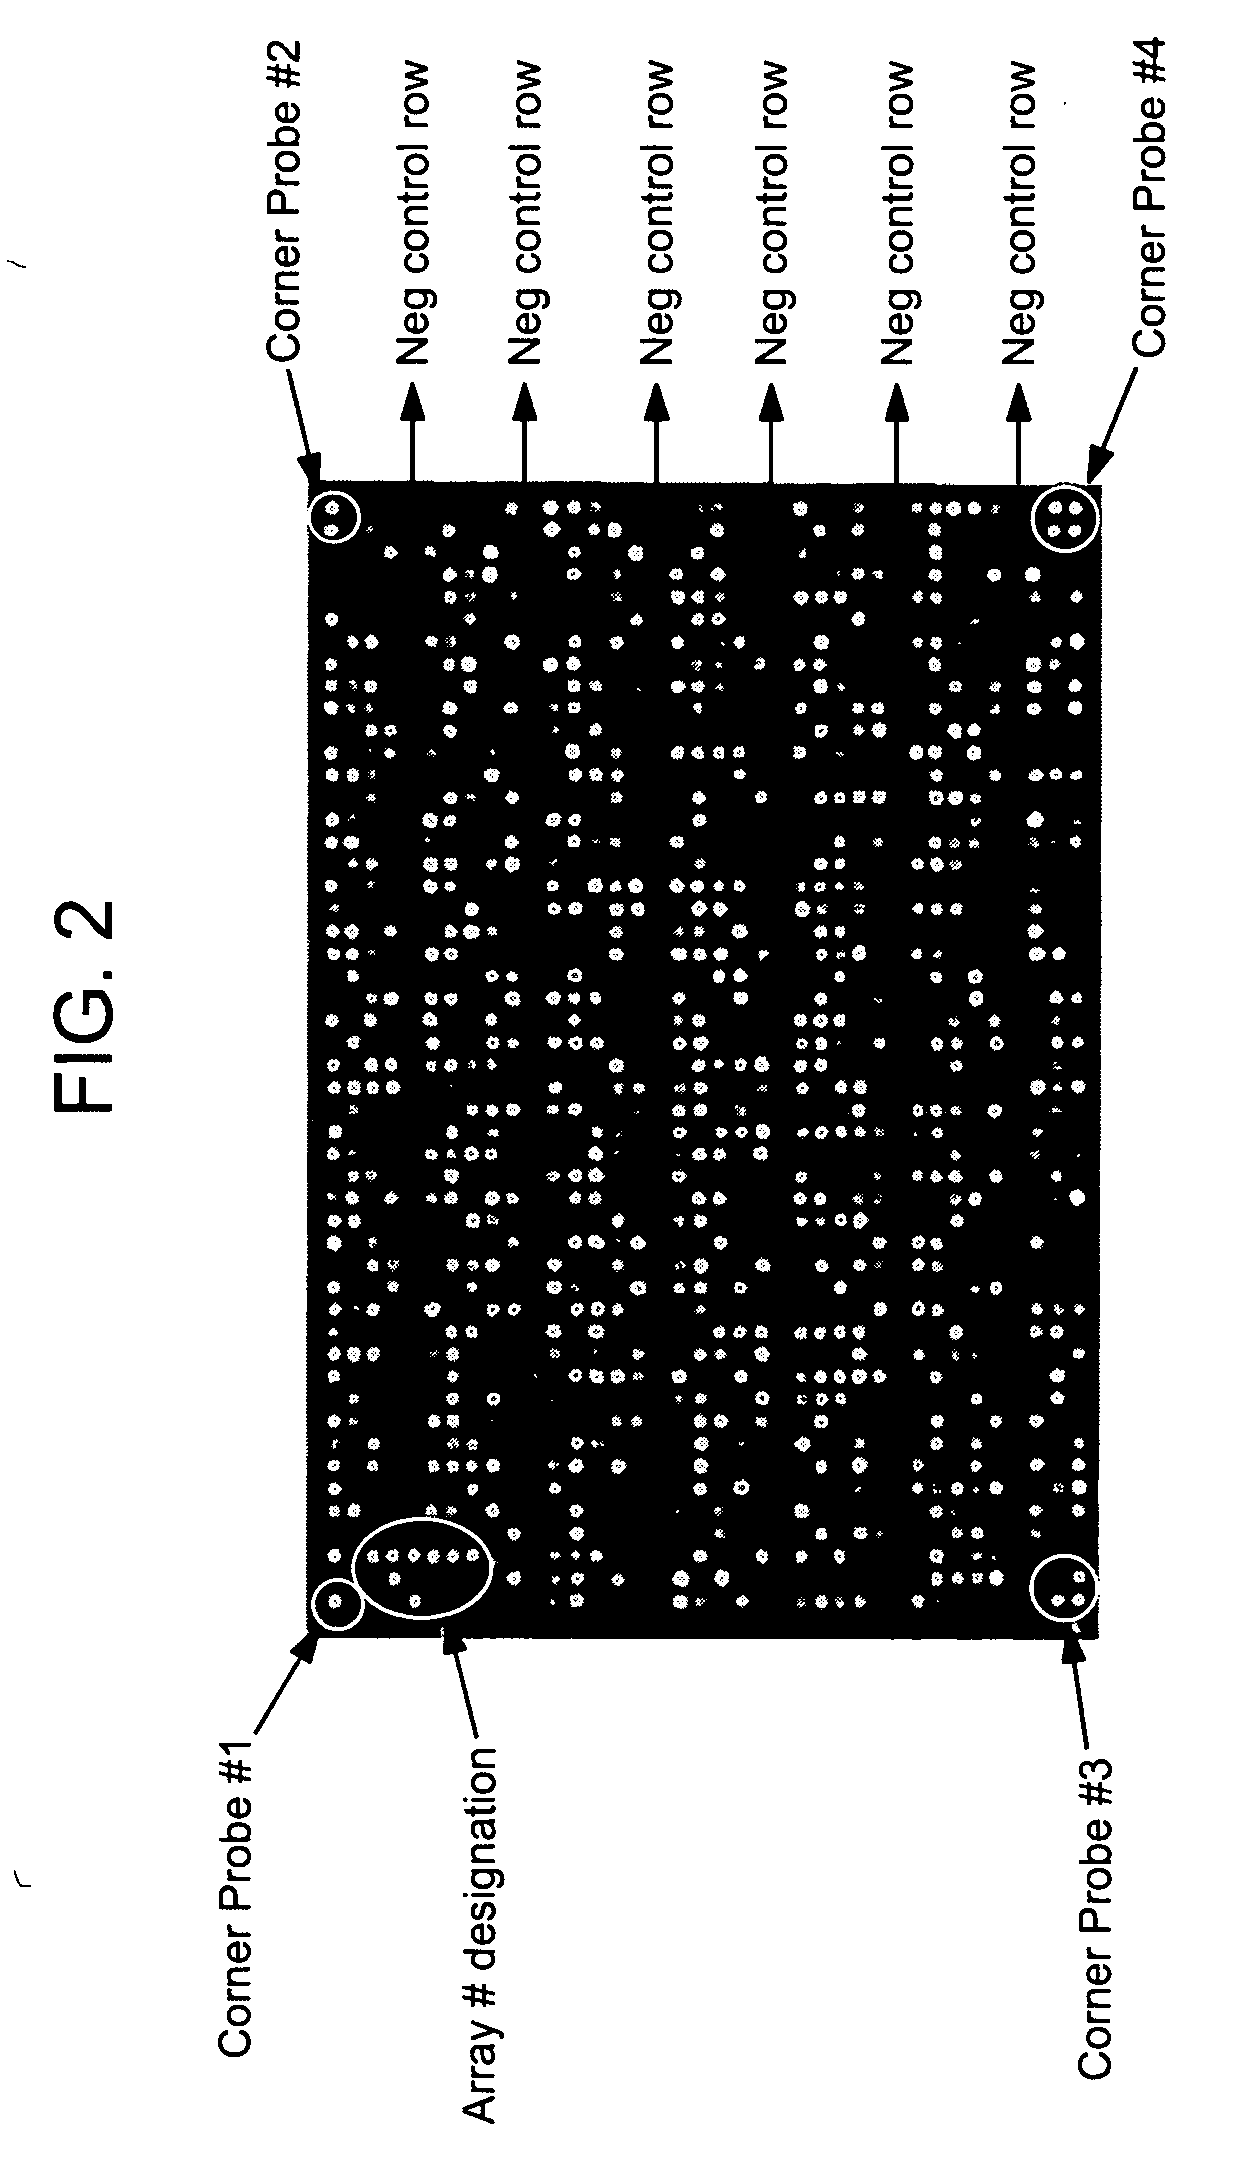 Methods for encoding non-biological information on microarrays